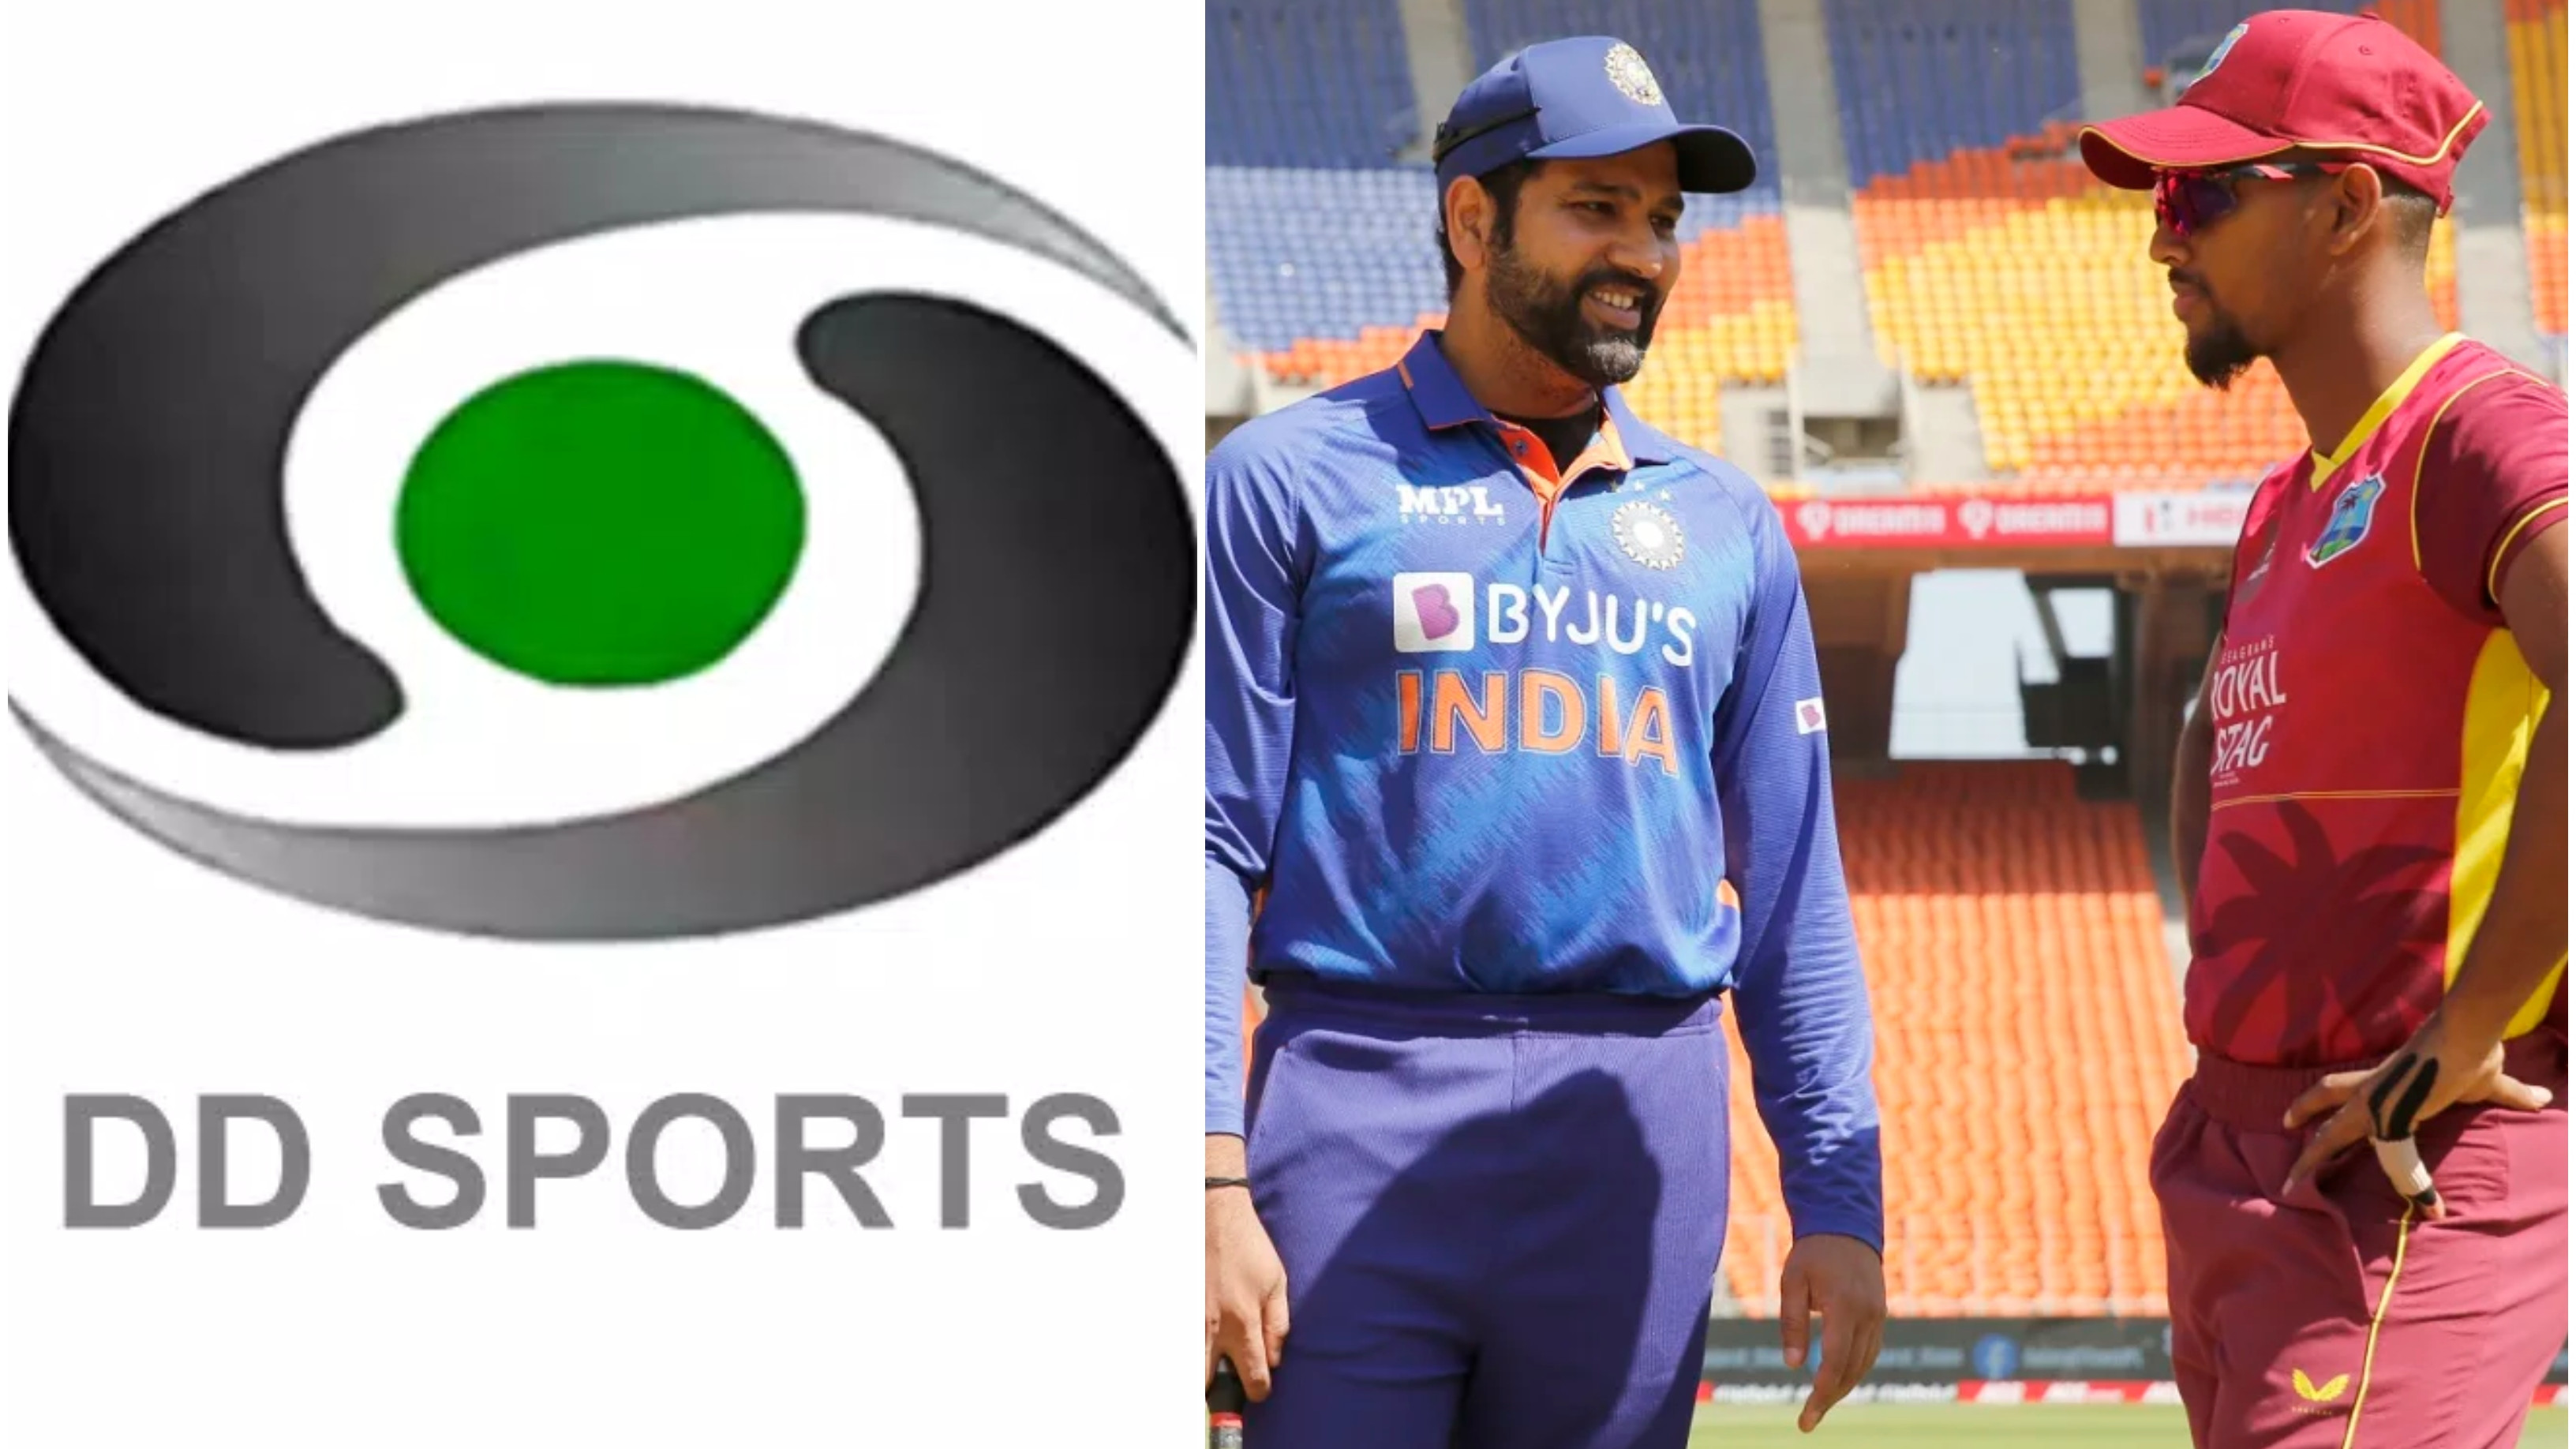 WI v IND 2022: DD Sports secures broadcasting rights of India’s upcoming white-ball tour to West Indies